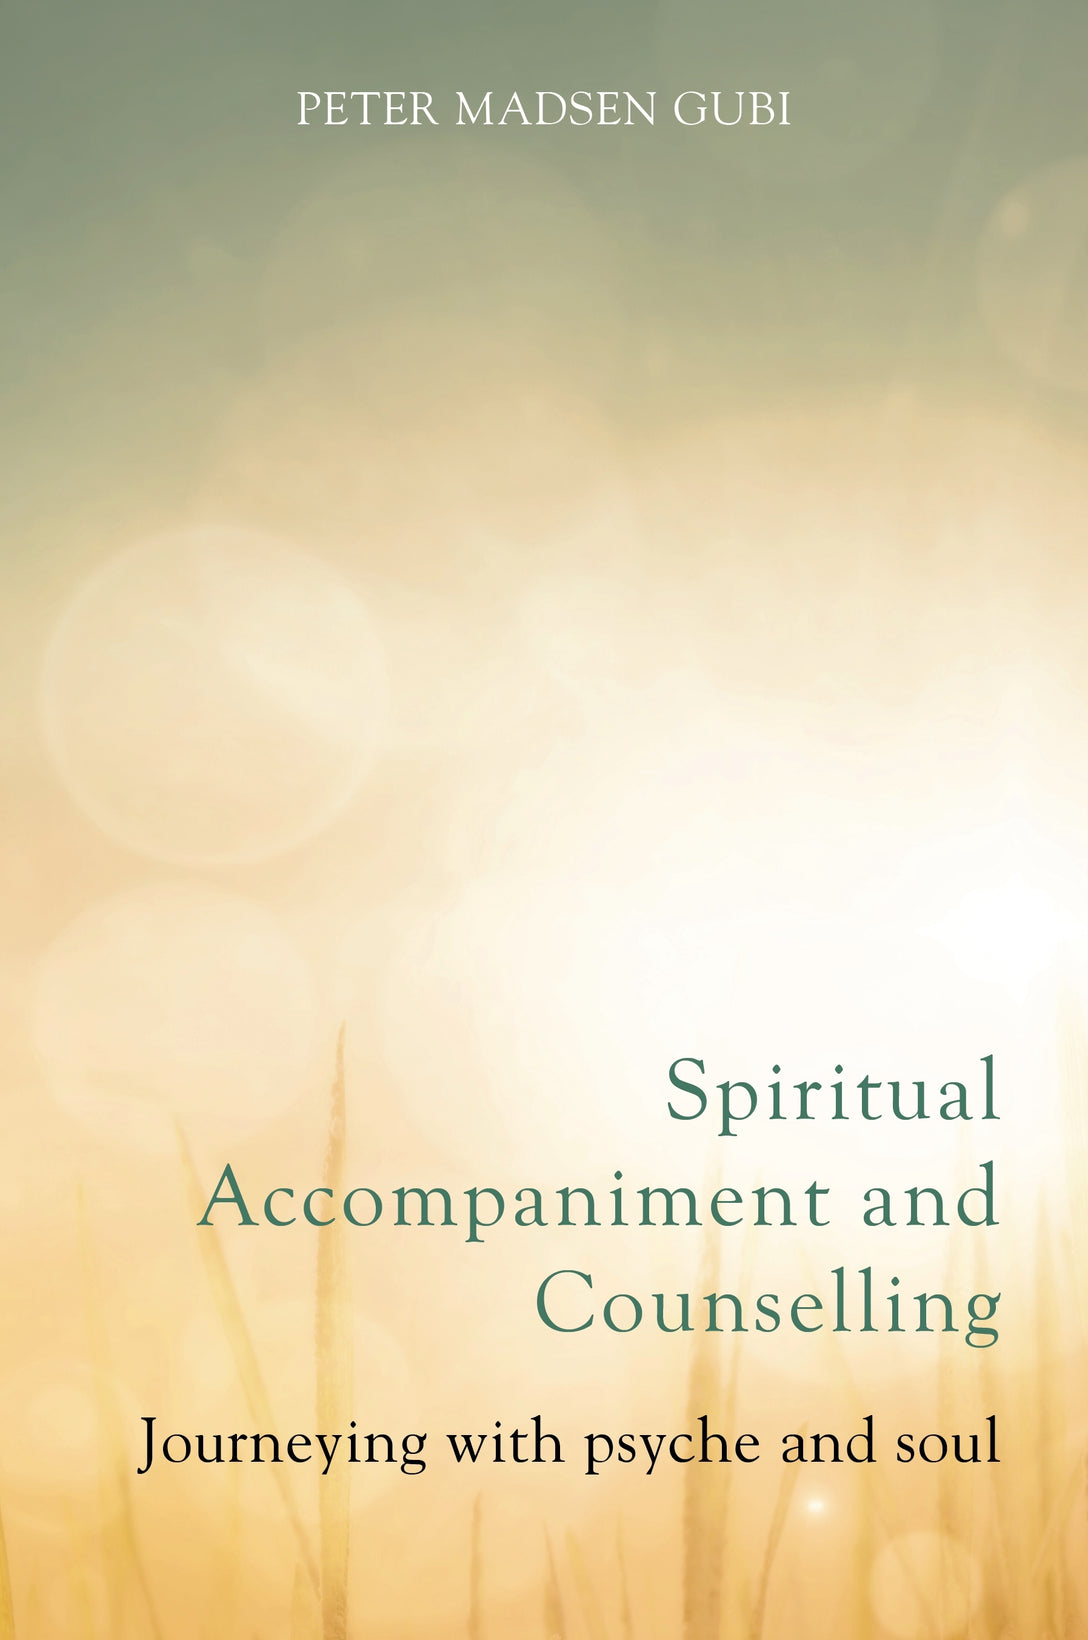 Spiritual Accompaniment and Counselling by Elaine Graham, Peter Madsen Gubi, No Author Listed